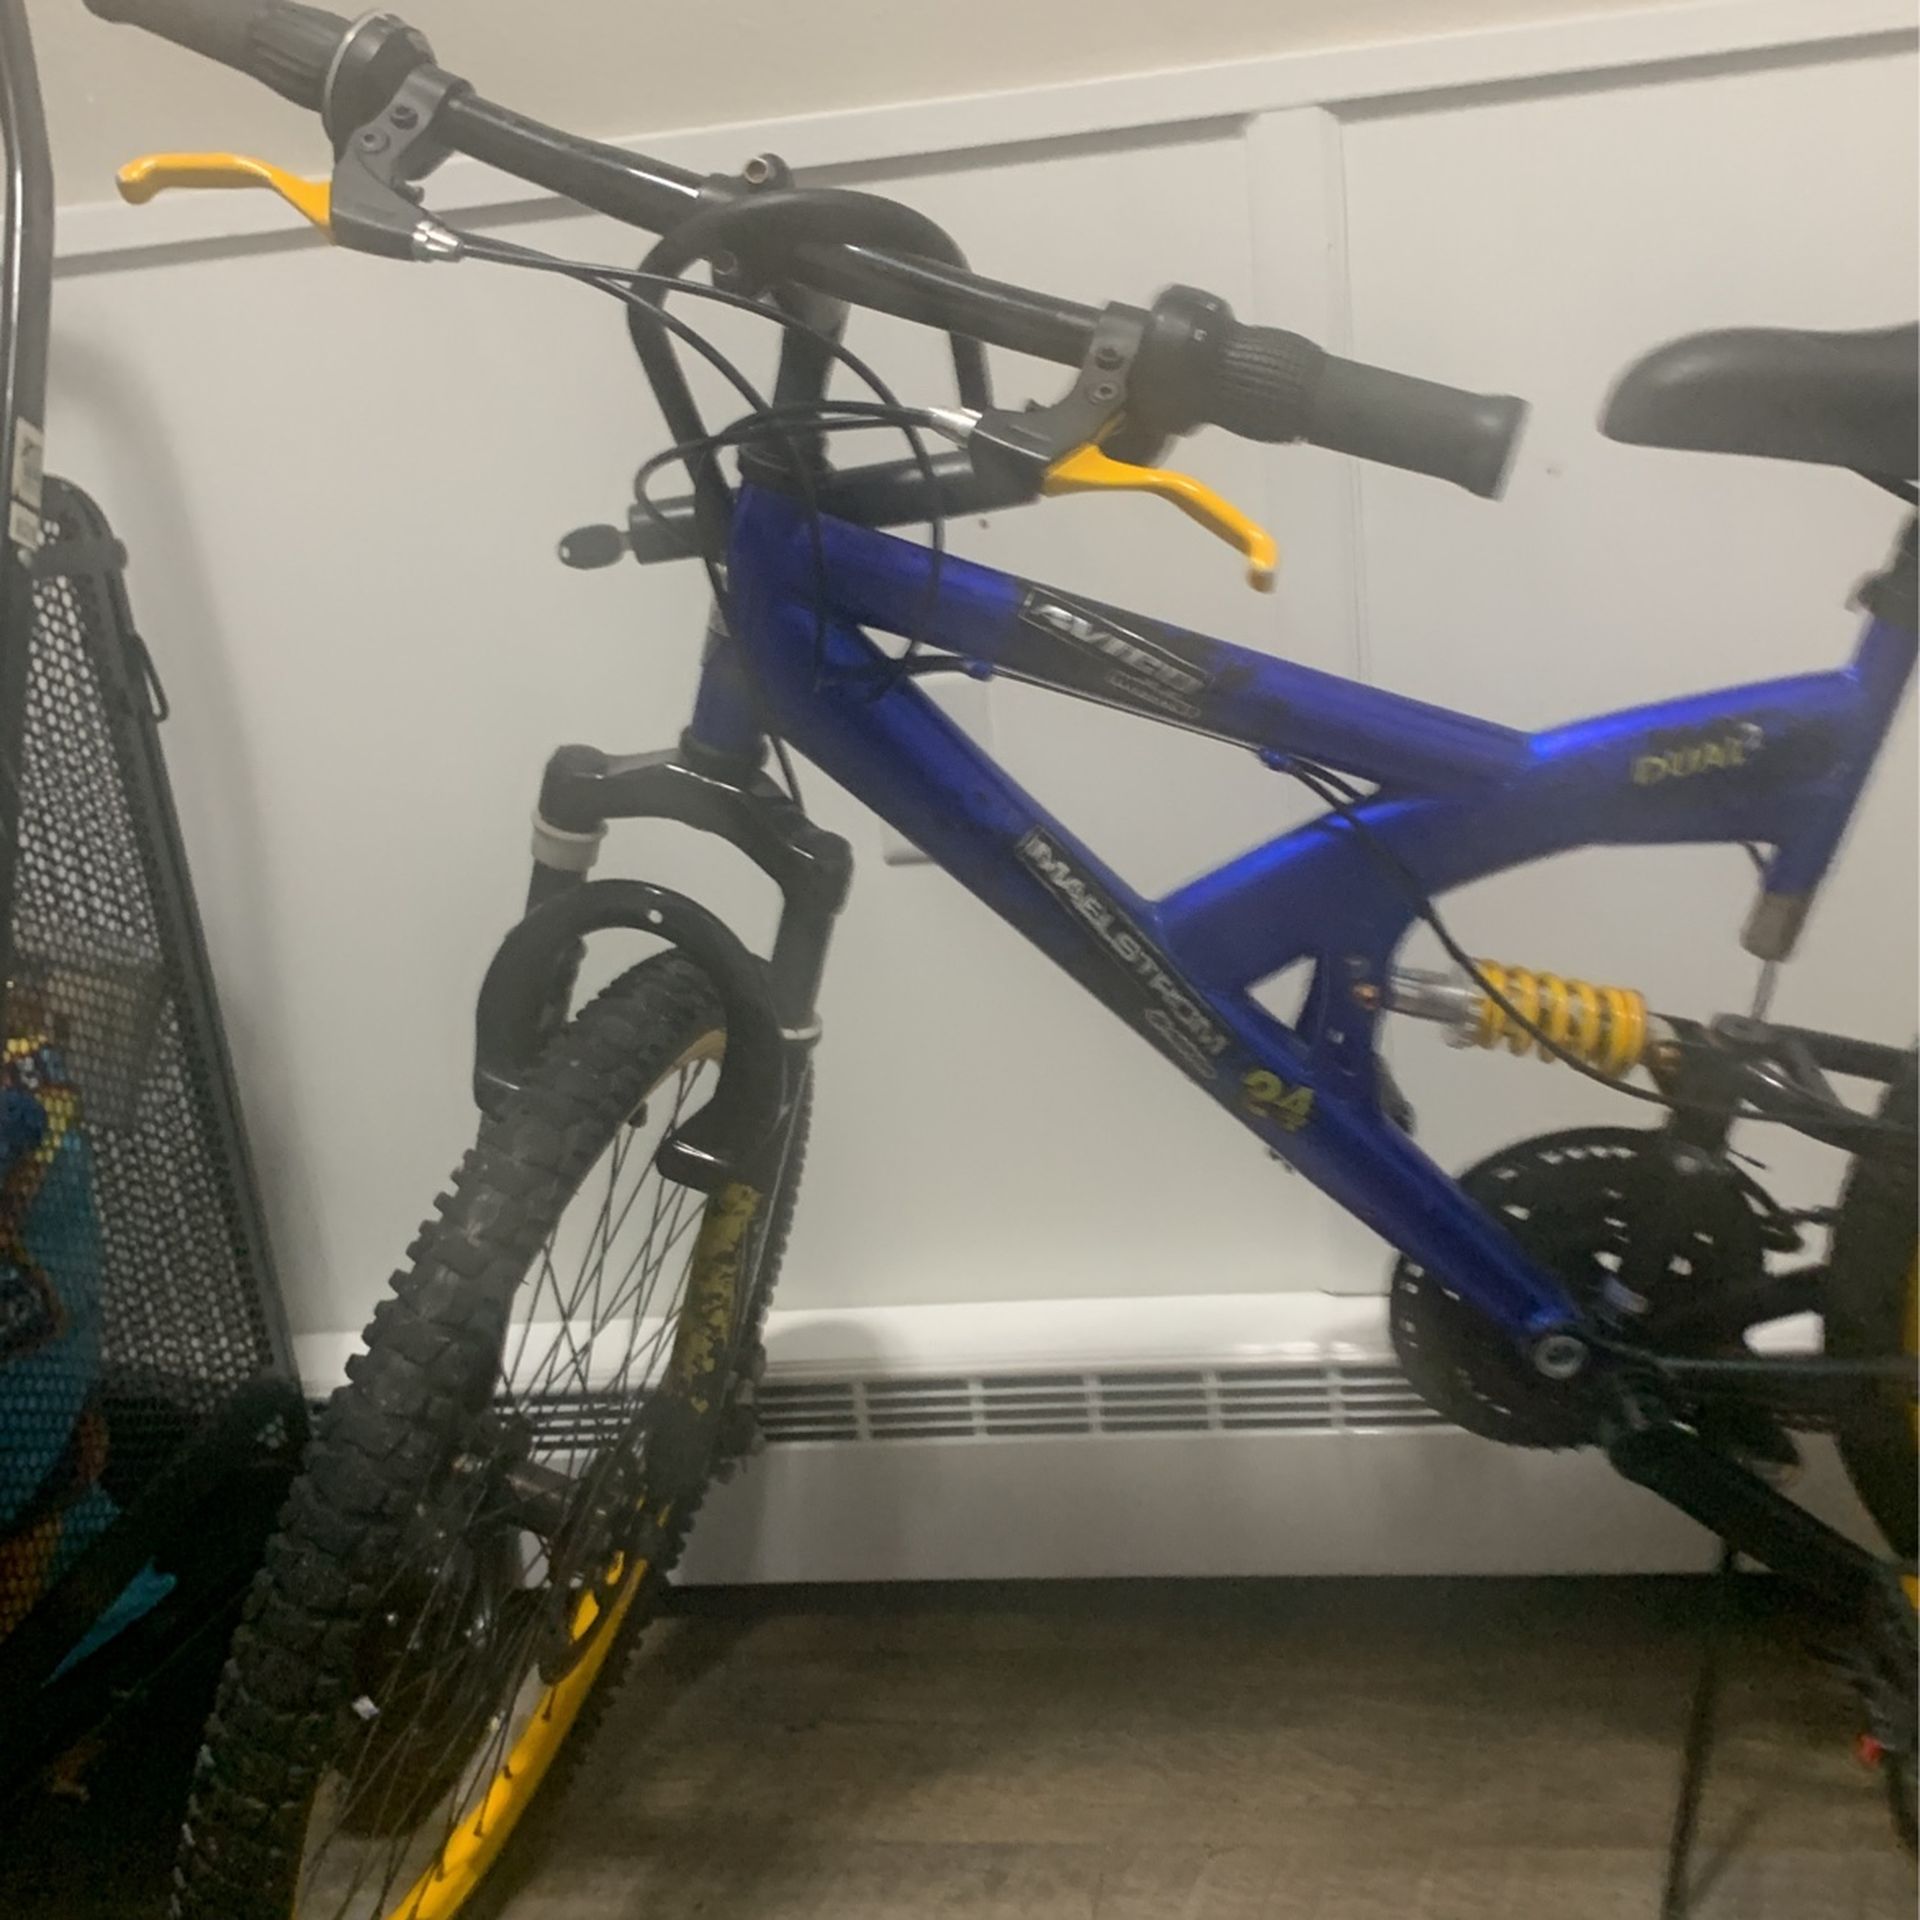 Used but decent Mountain Bike 